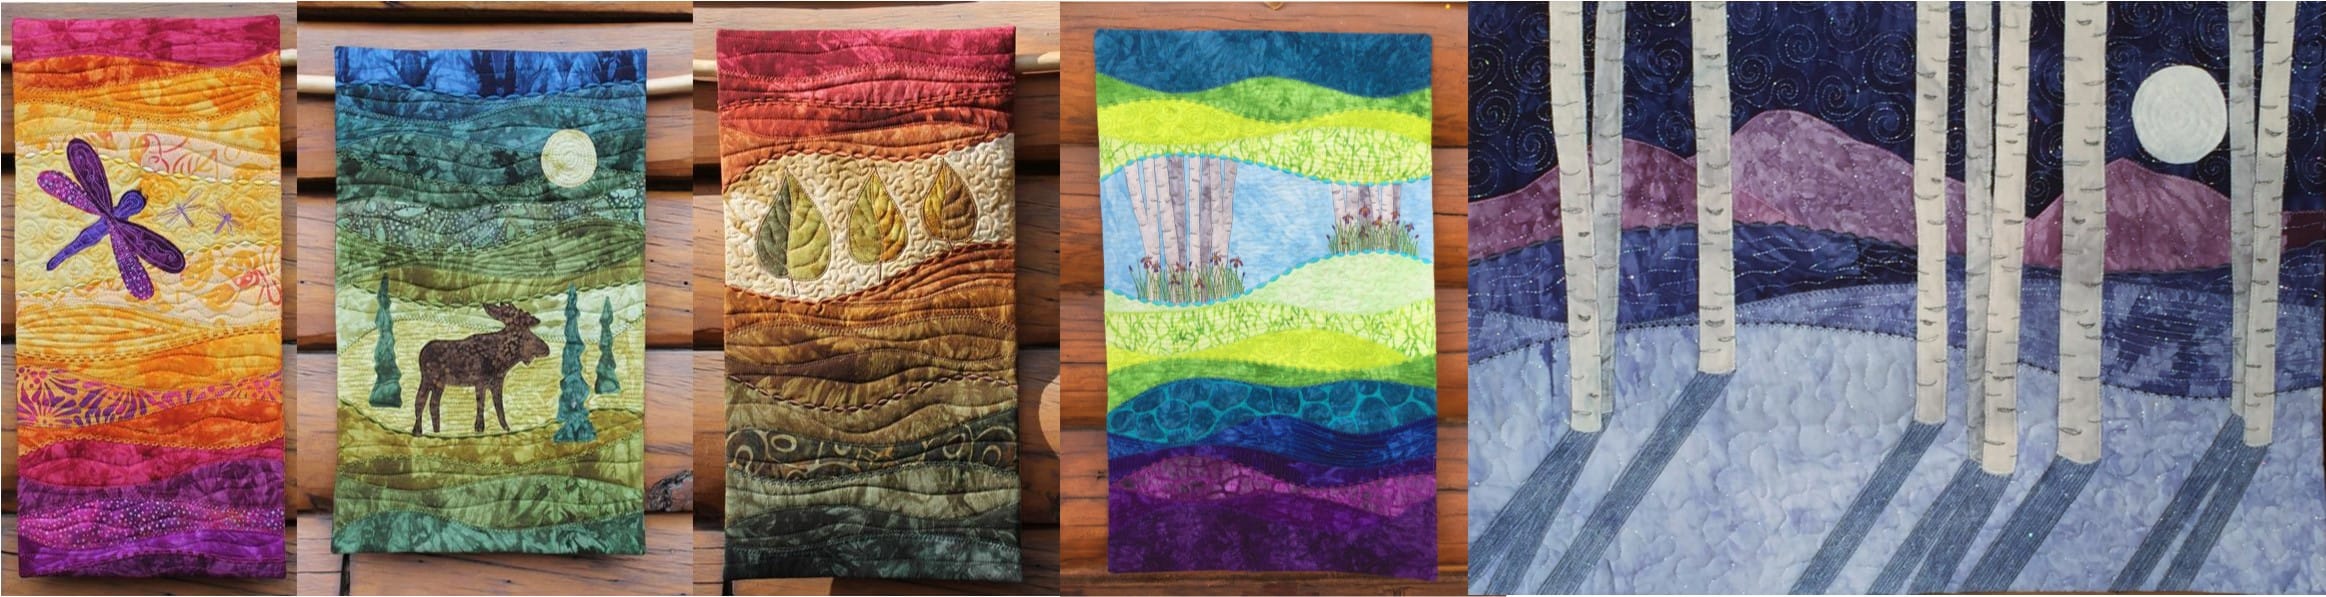 Wall hanging quilts